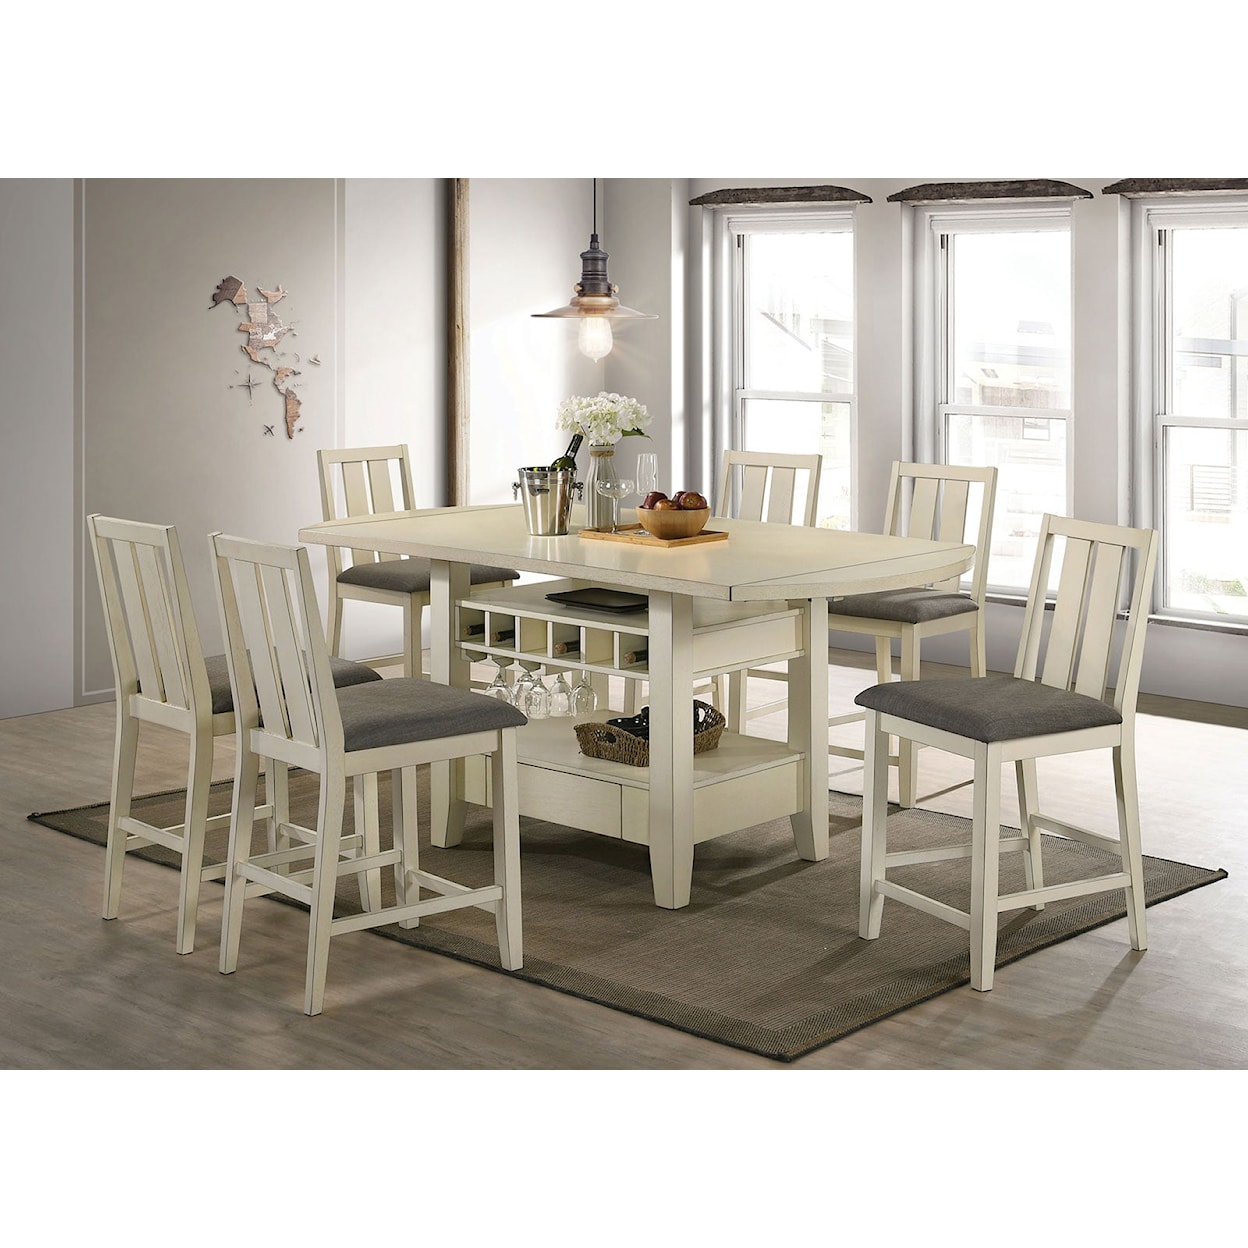 Furniture of America WILSONVILLE Counter-Height Dining Table with Storage